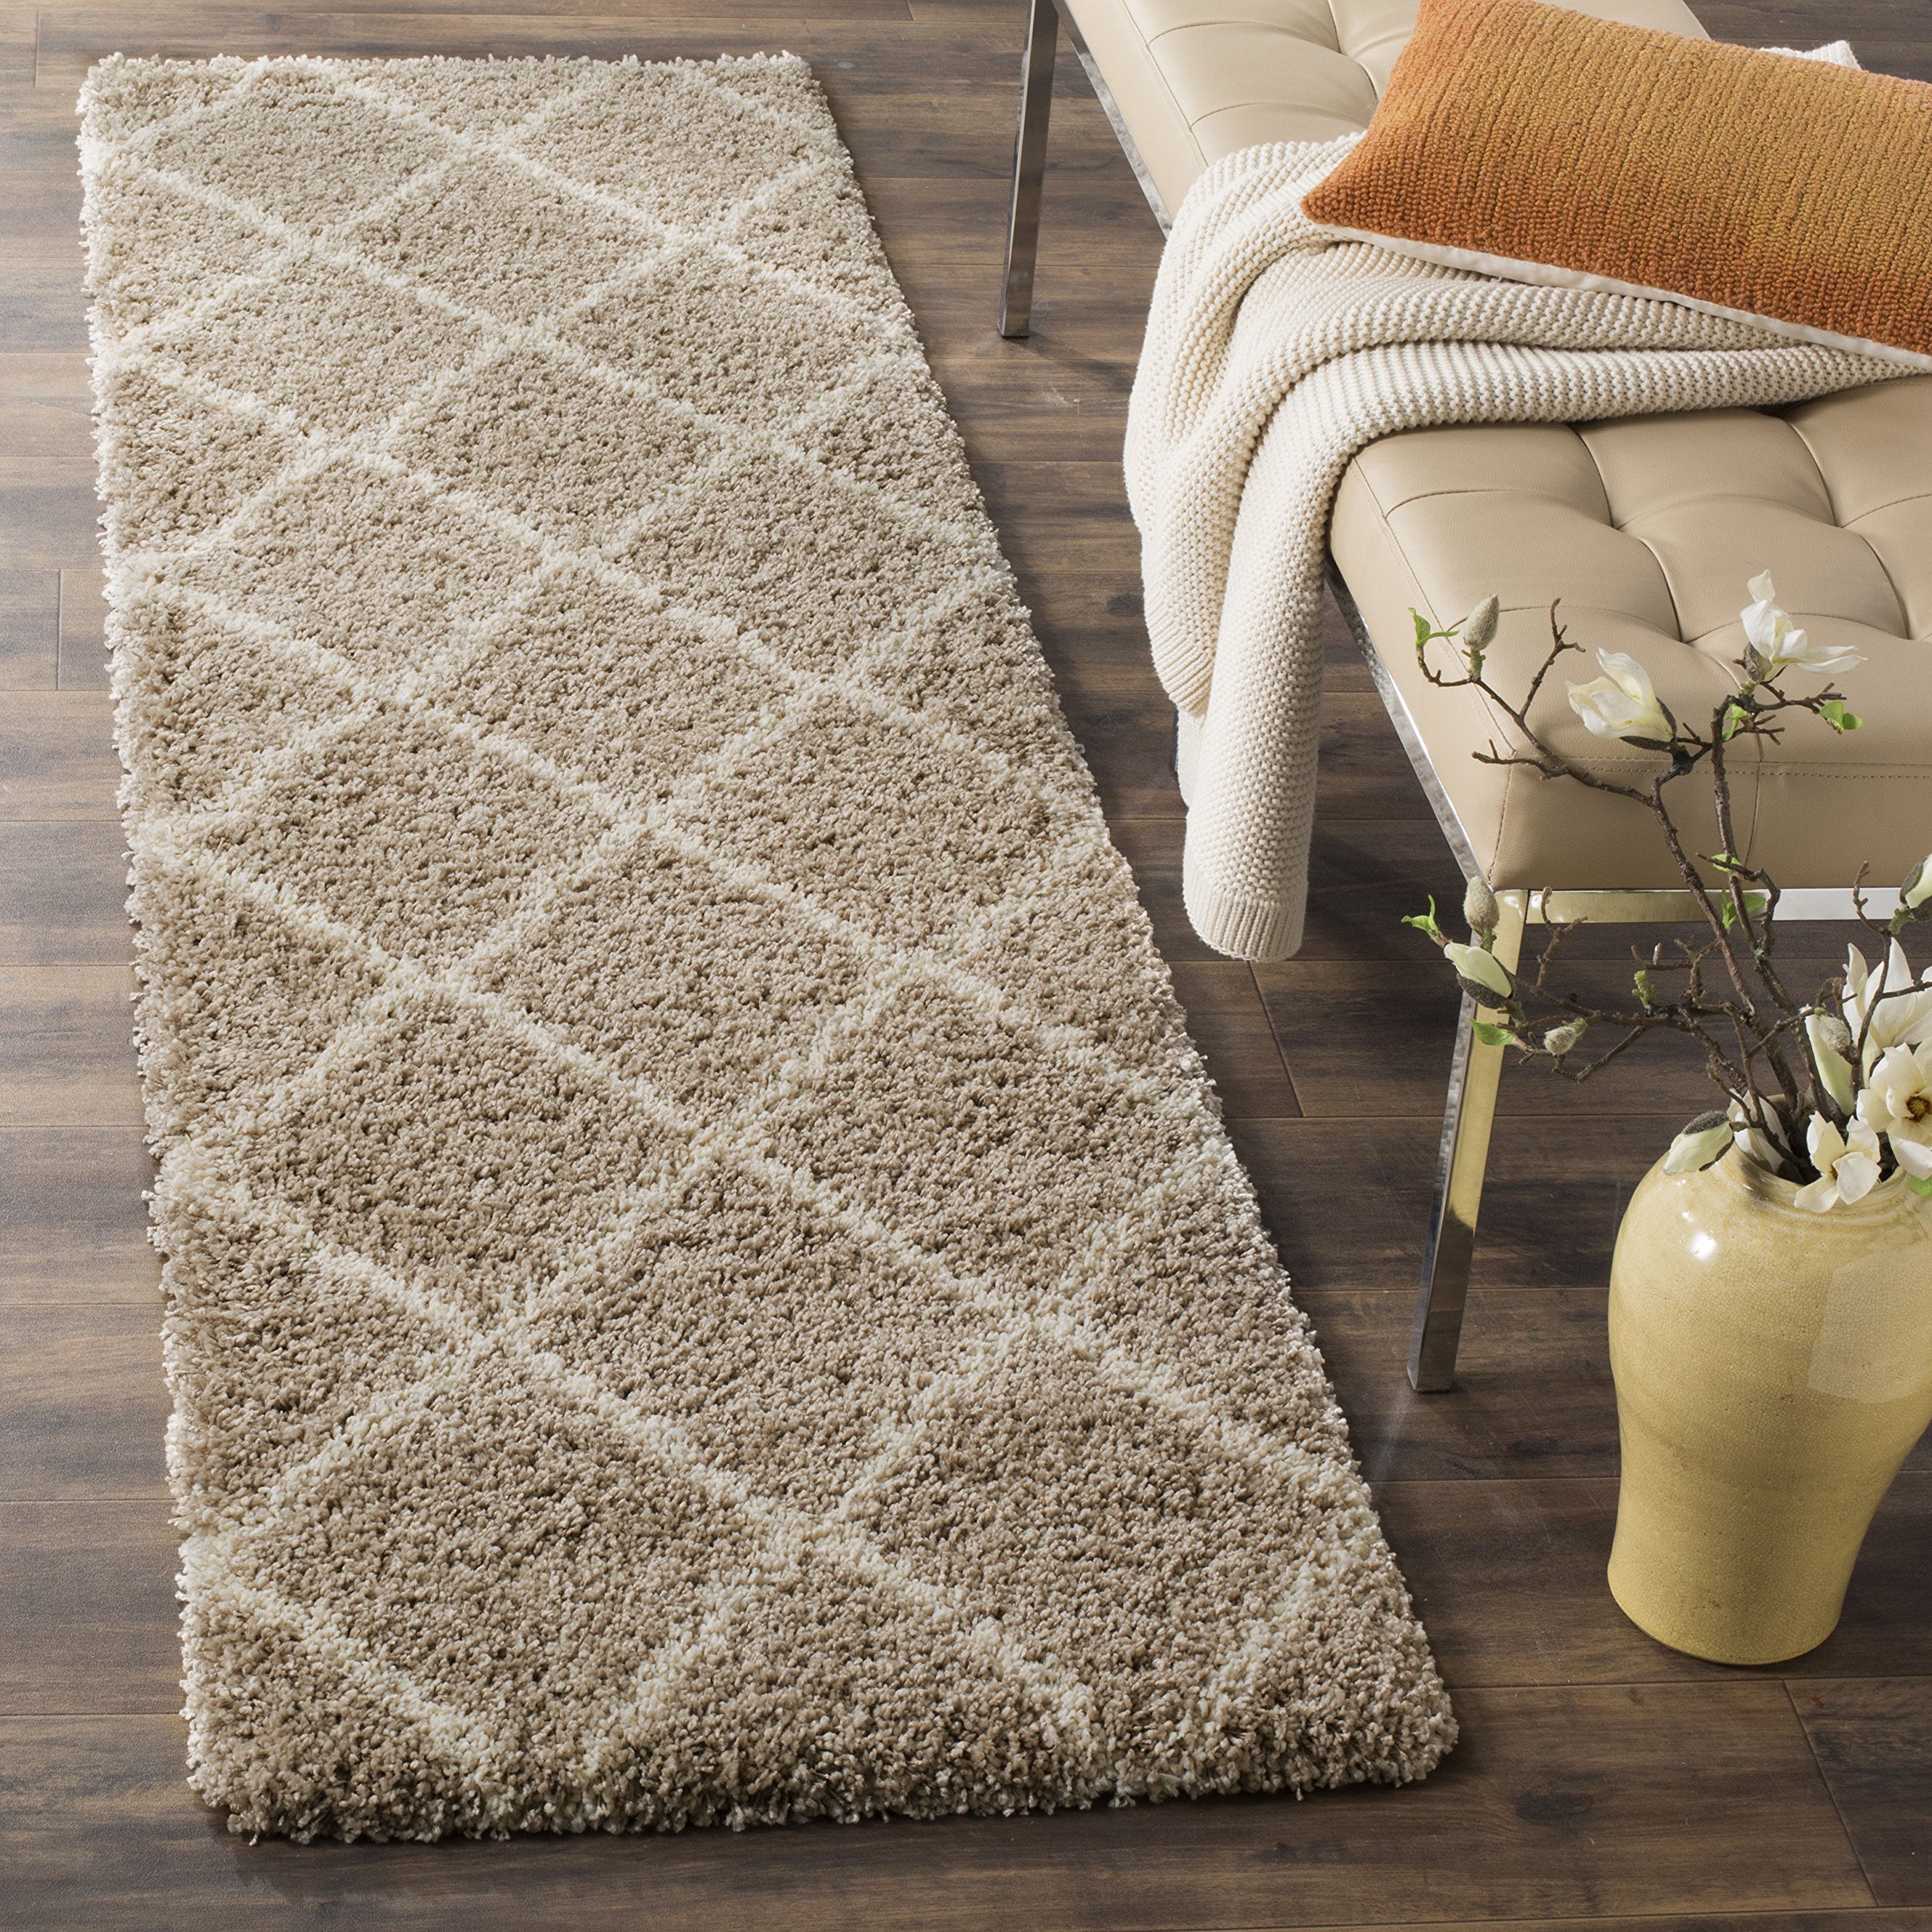  Safavieh Hudson Shag Collection Accent Rug - 2' x 3', Beige & Ivory, Modern Trellis Design, Non-Shedding & Easy Care, 2-inch Thick Ideal for High Traffic Areas in Foyer, Living Room,...